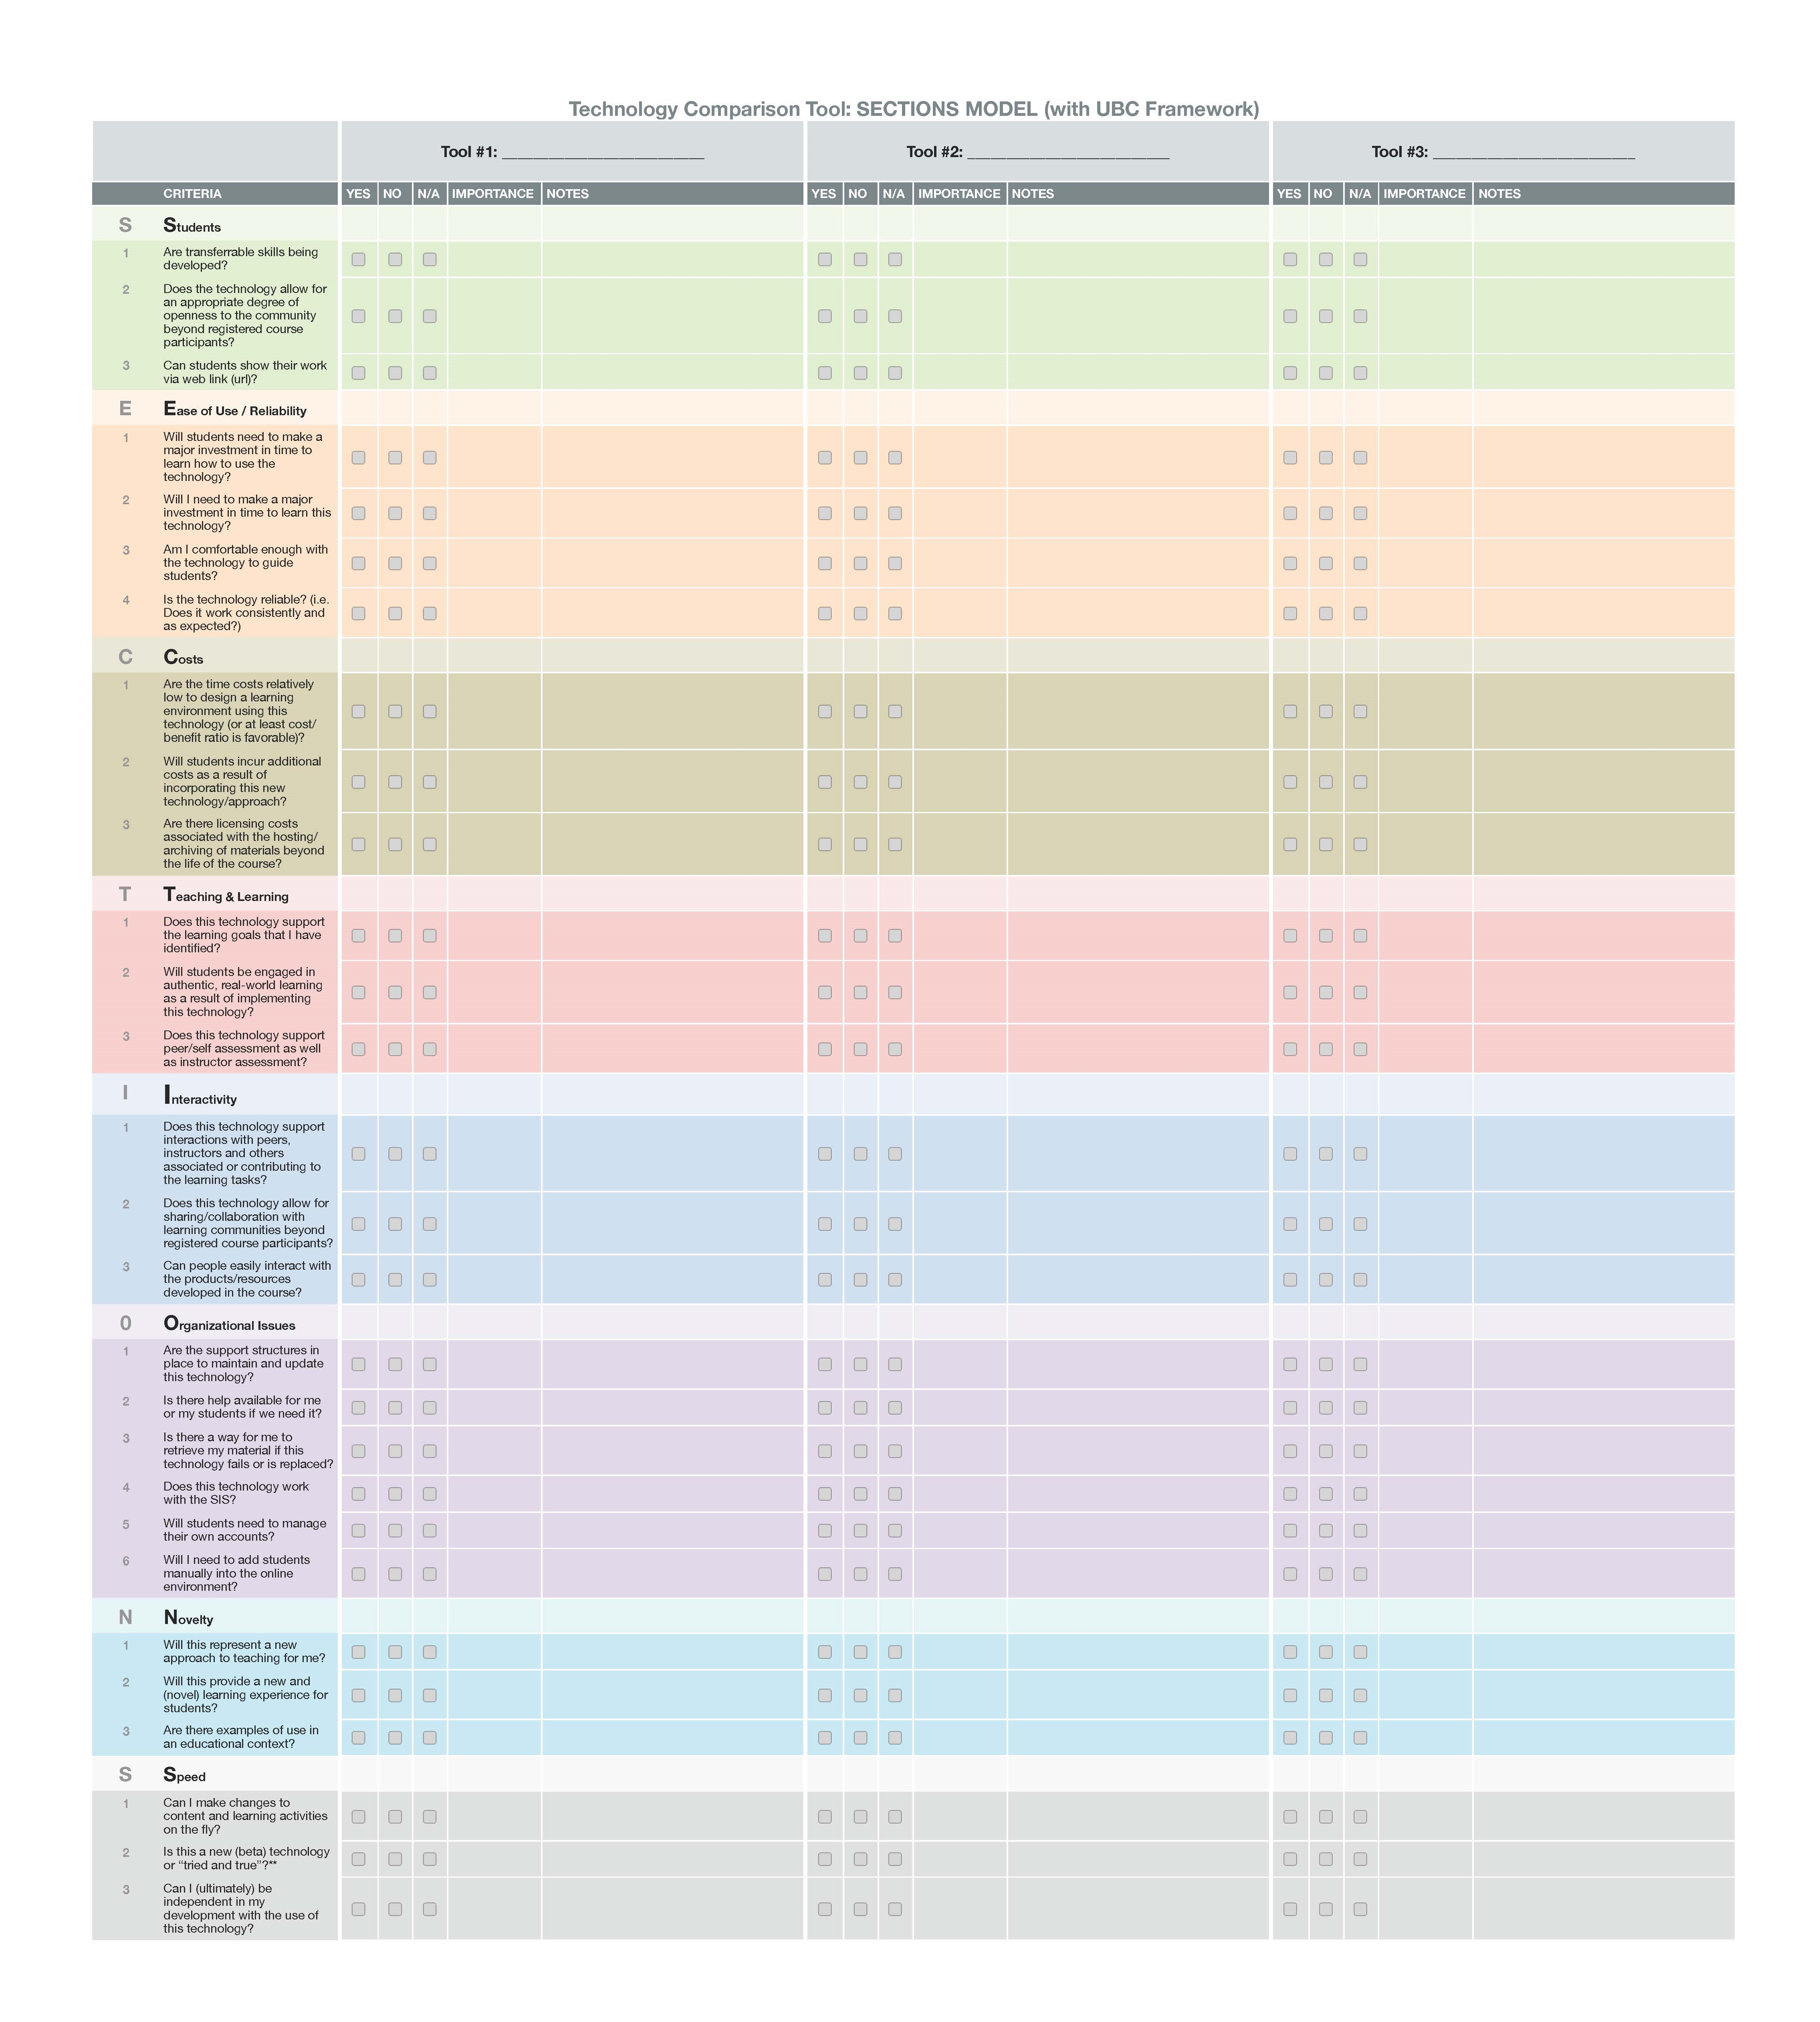 SECTIONS model checklist (Click to open full-sized version)  Screenshot of SECTIONS model (with UBC Framework) checklist table